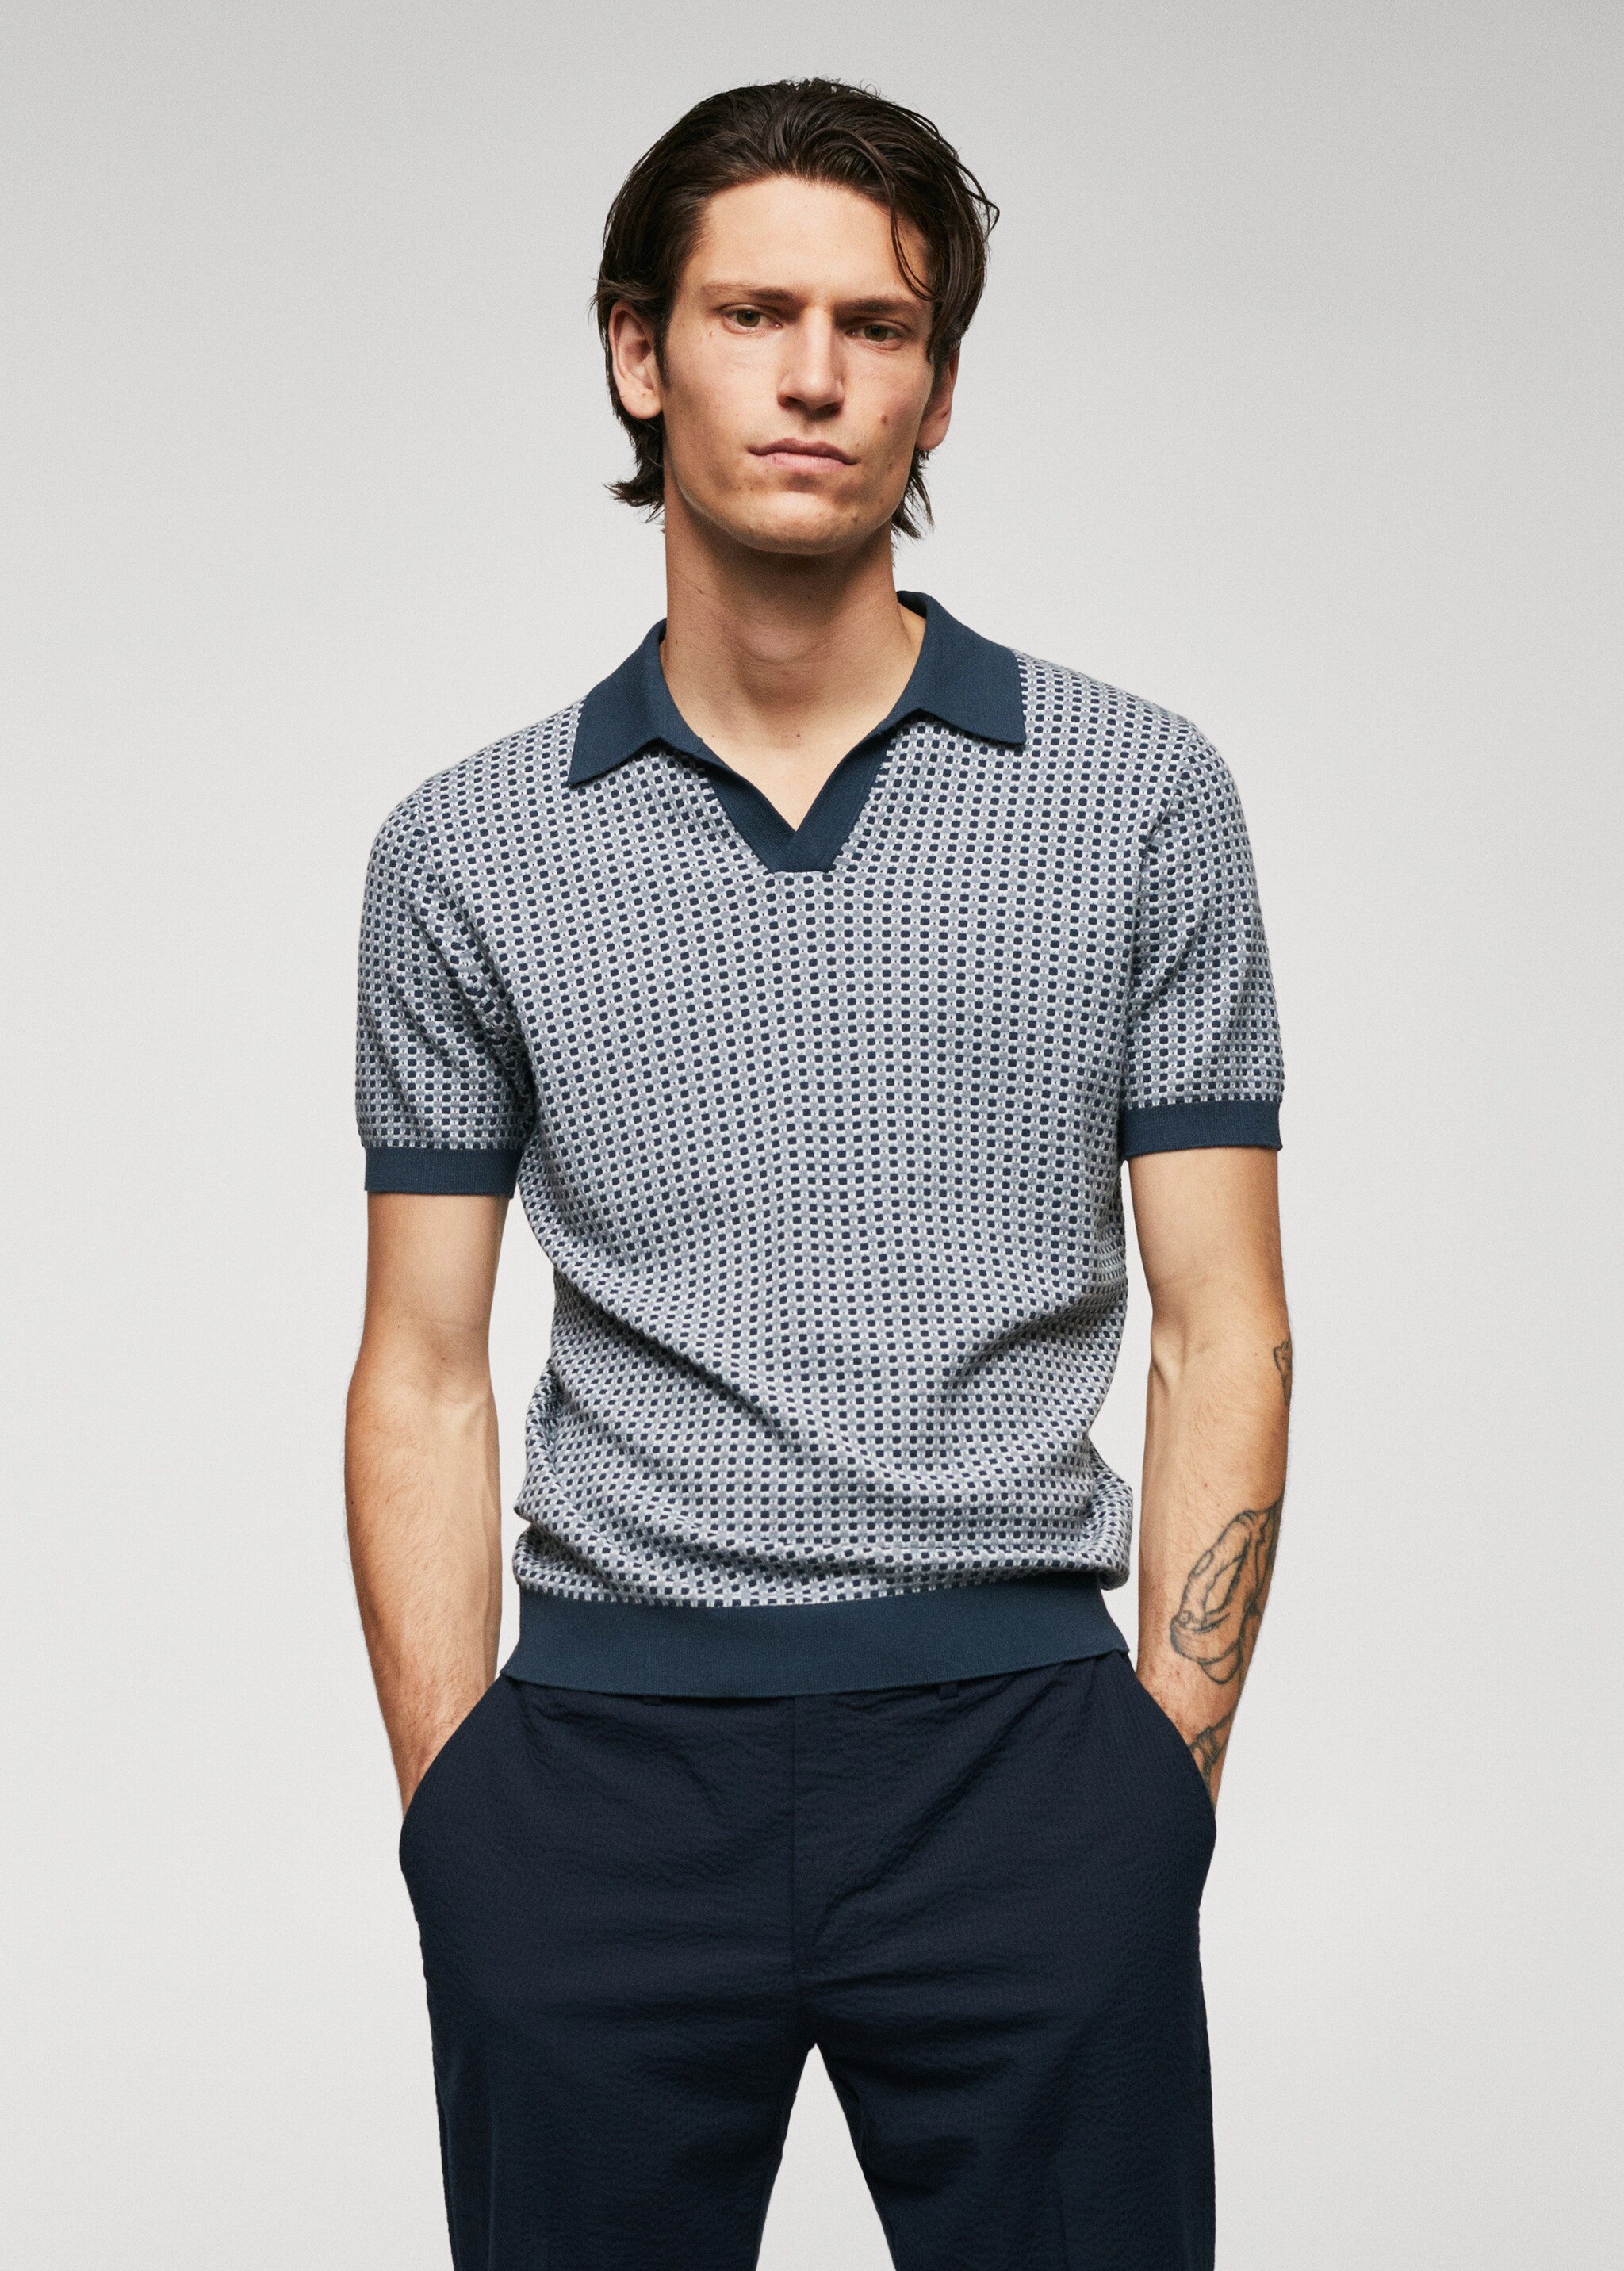 Fine-knit polo shirt with geometric structure - Medium plane